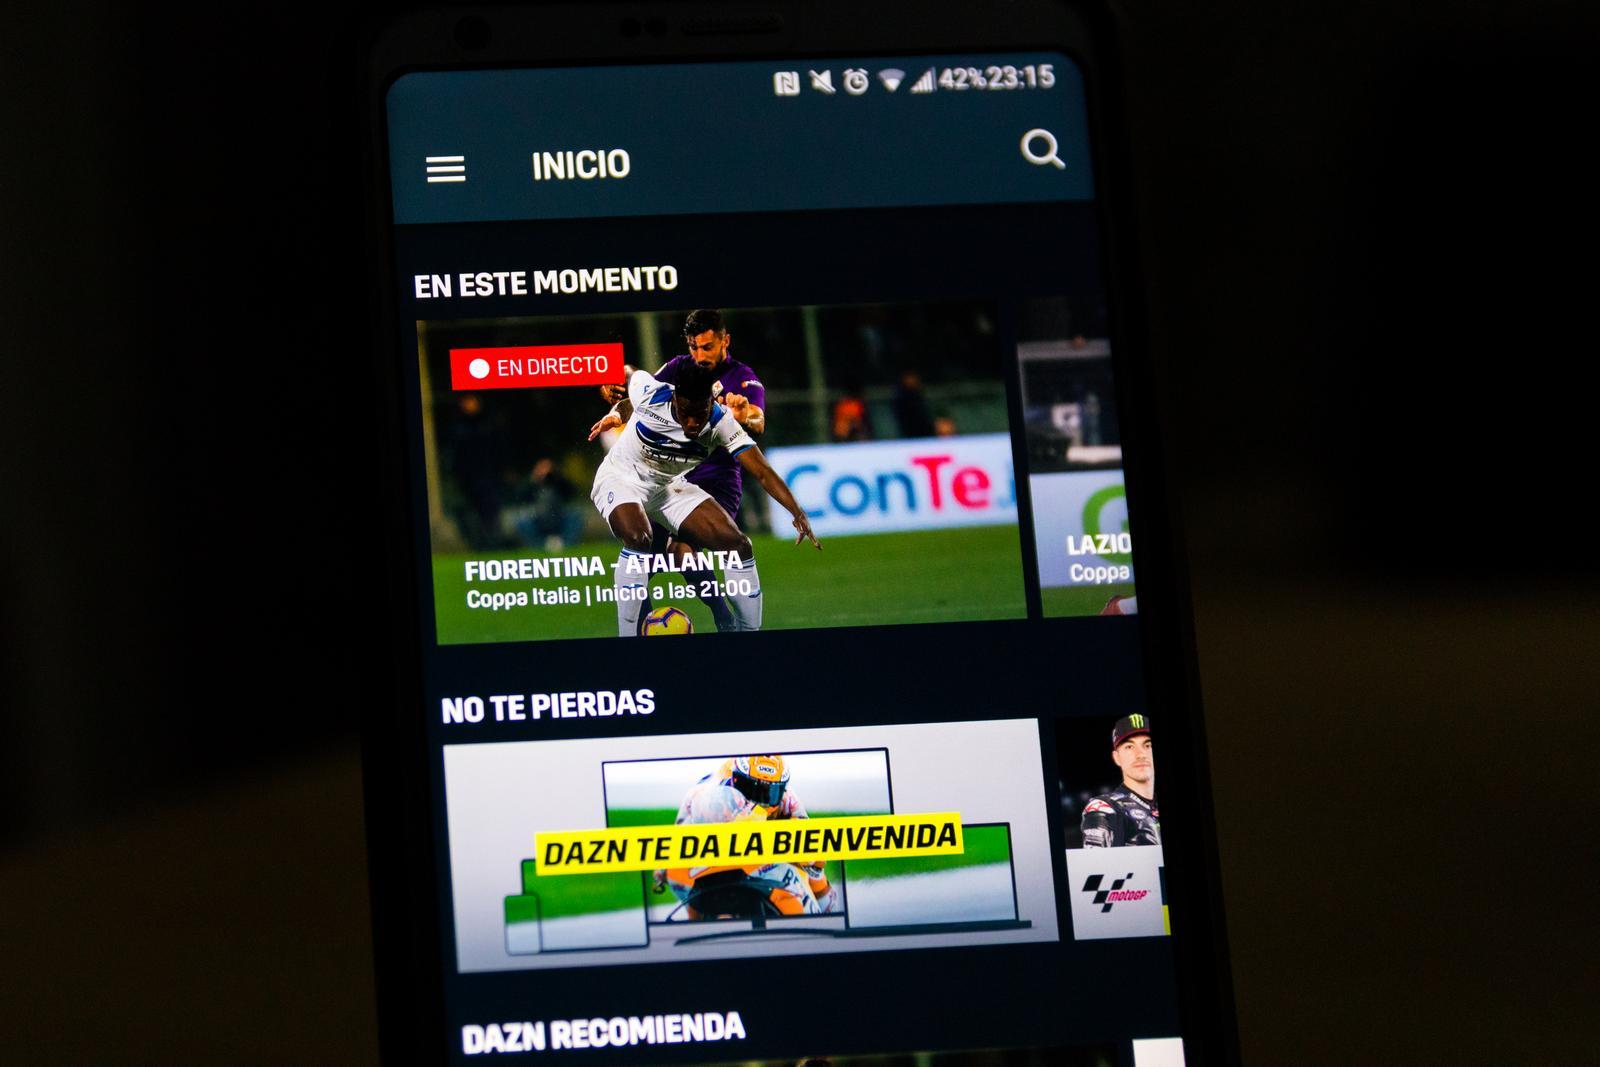 DAZN won't load and hangs up: Troubleshoot connection issues